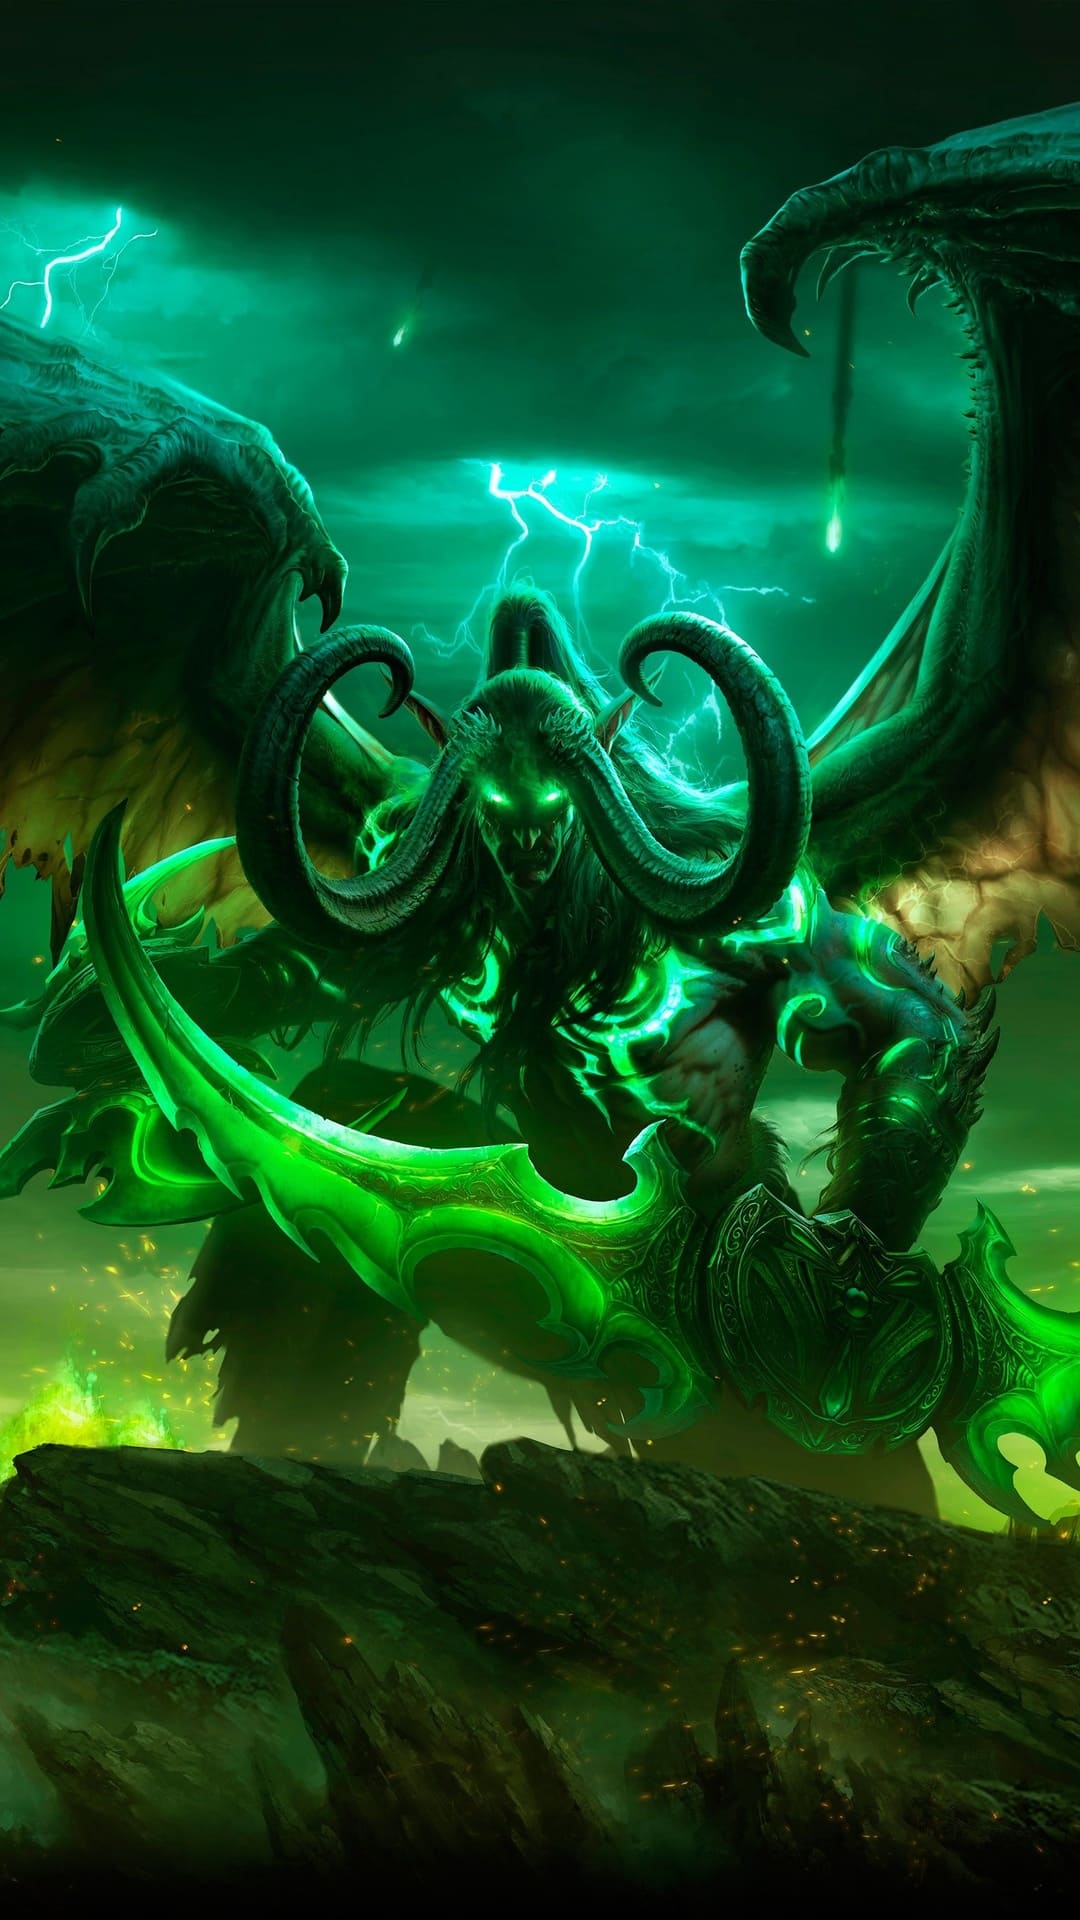 World of Warcraft Wallpapers - Top 45